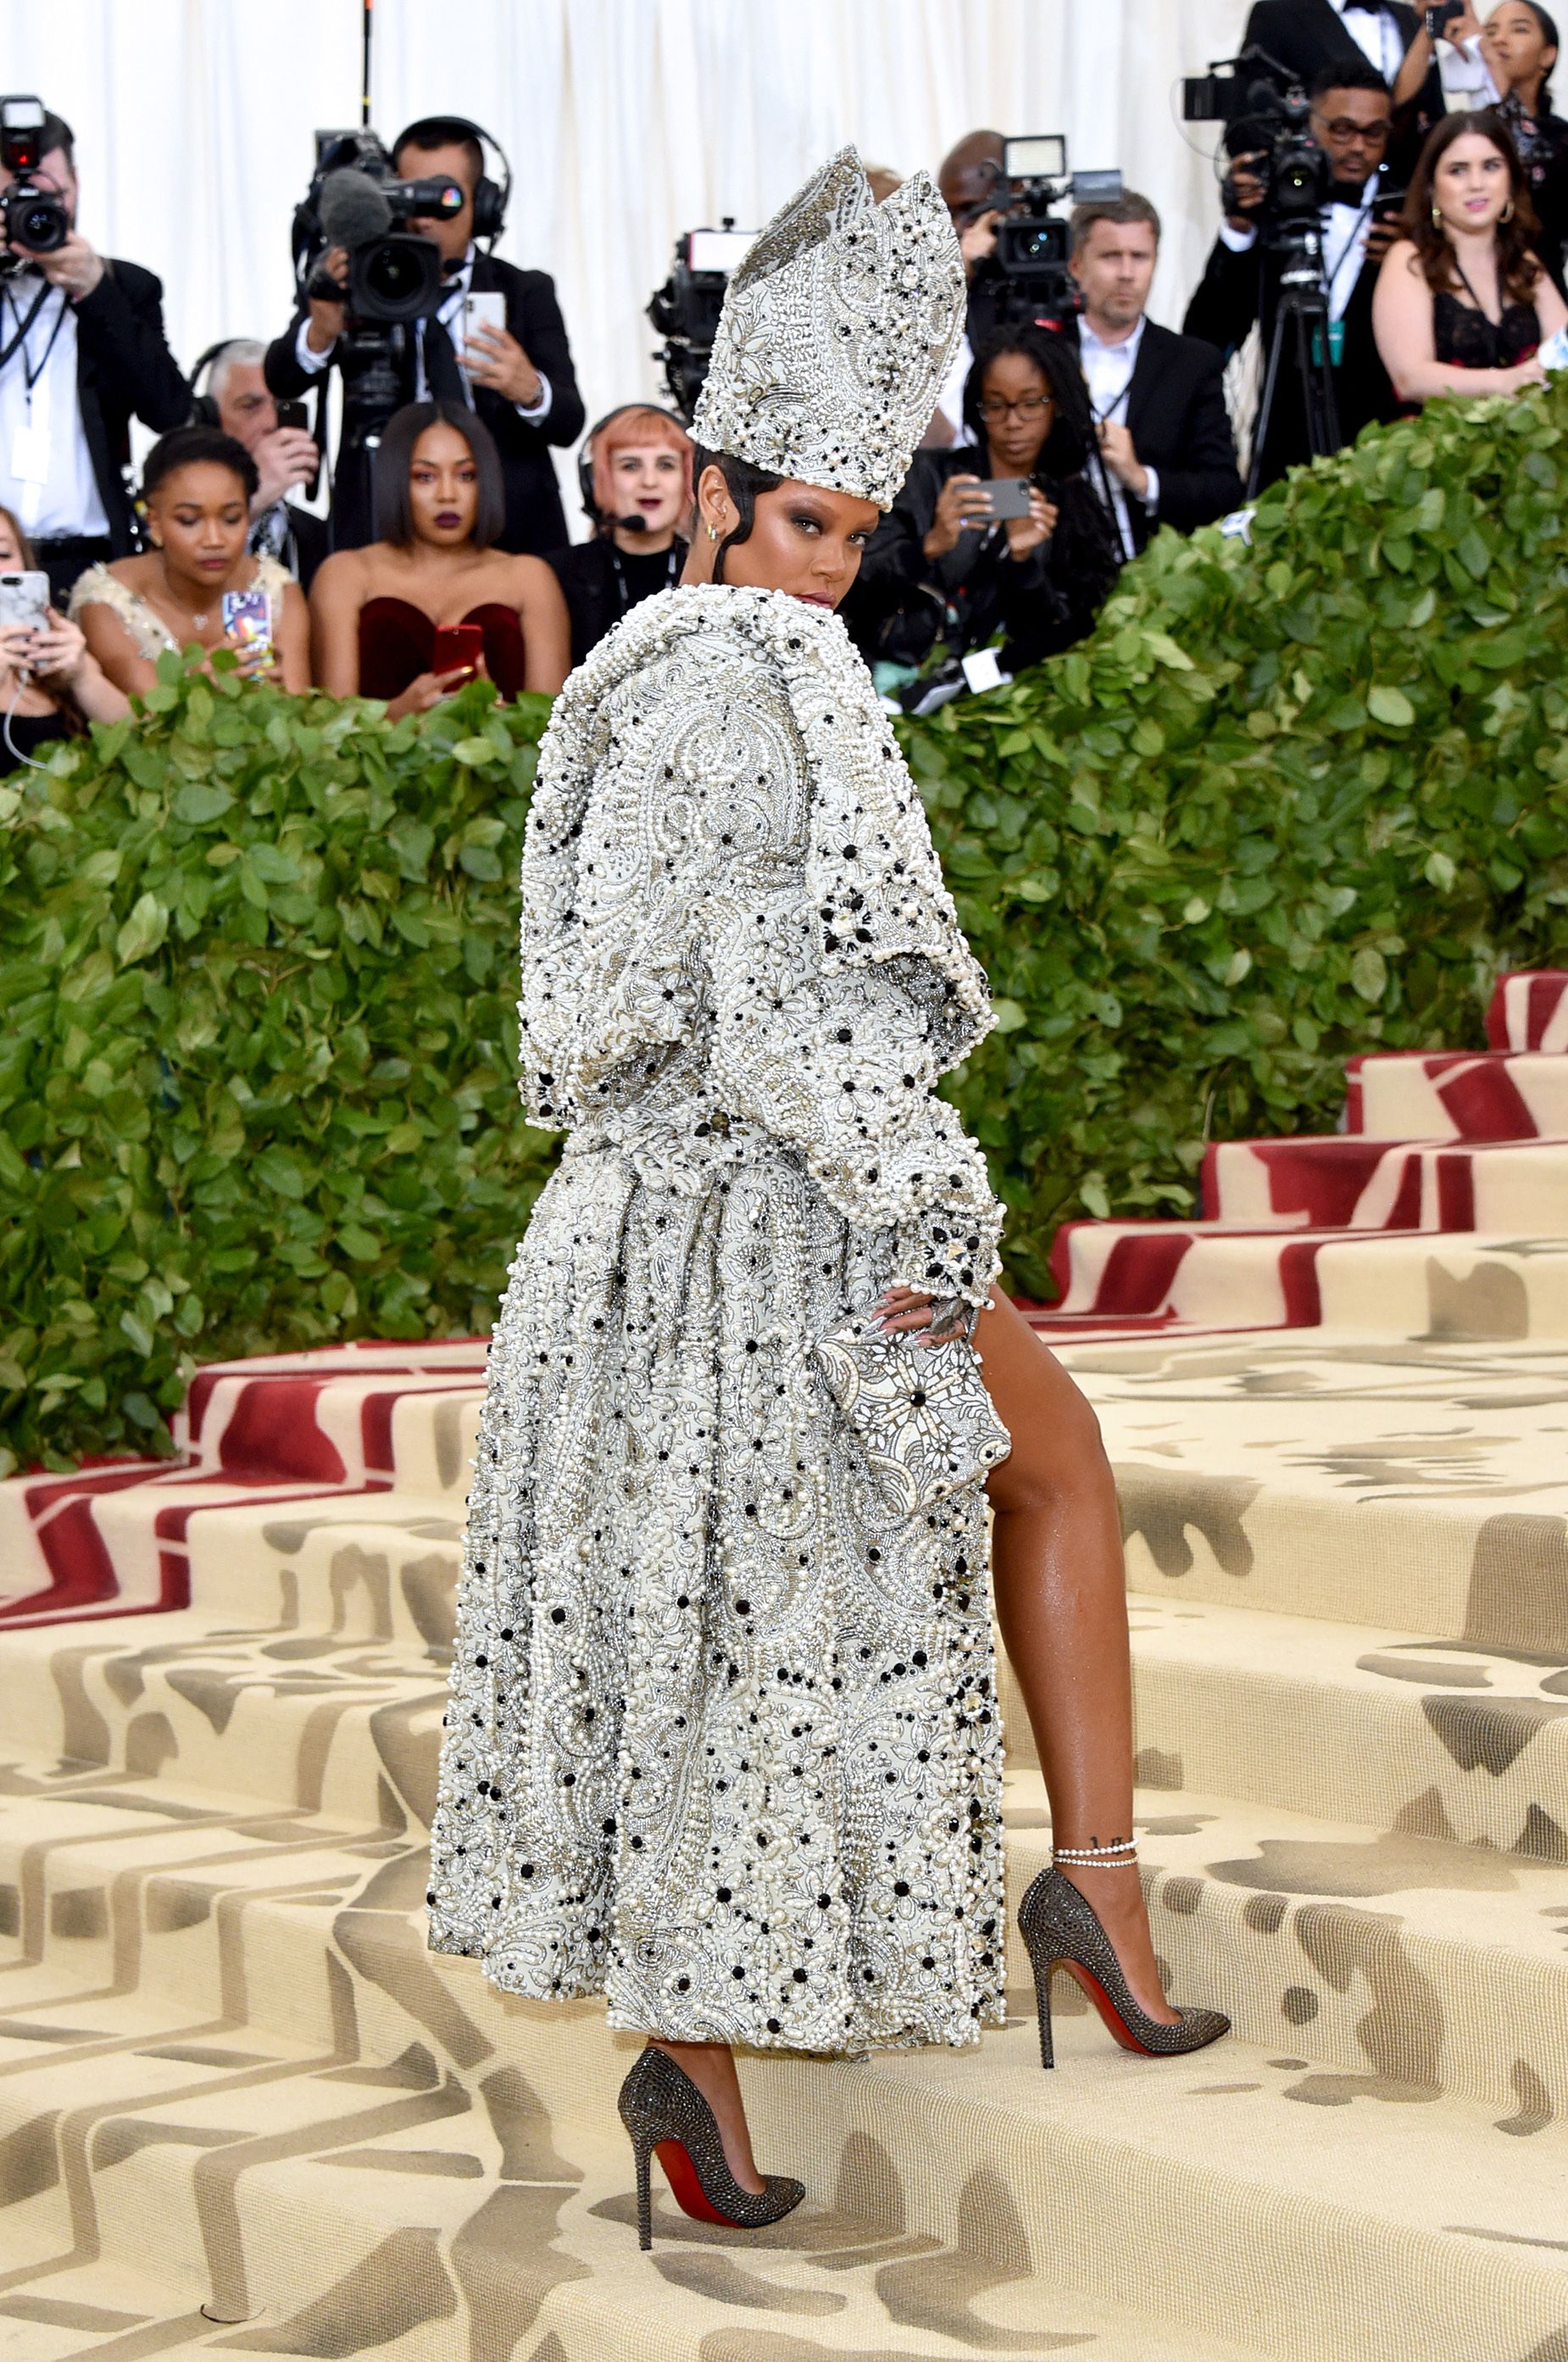 The red sole is a true red carpet staple. Rihanna chose a pair to wear to the 2019 "Camp" themed Met Gala. 